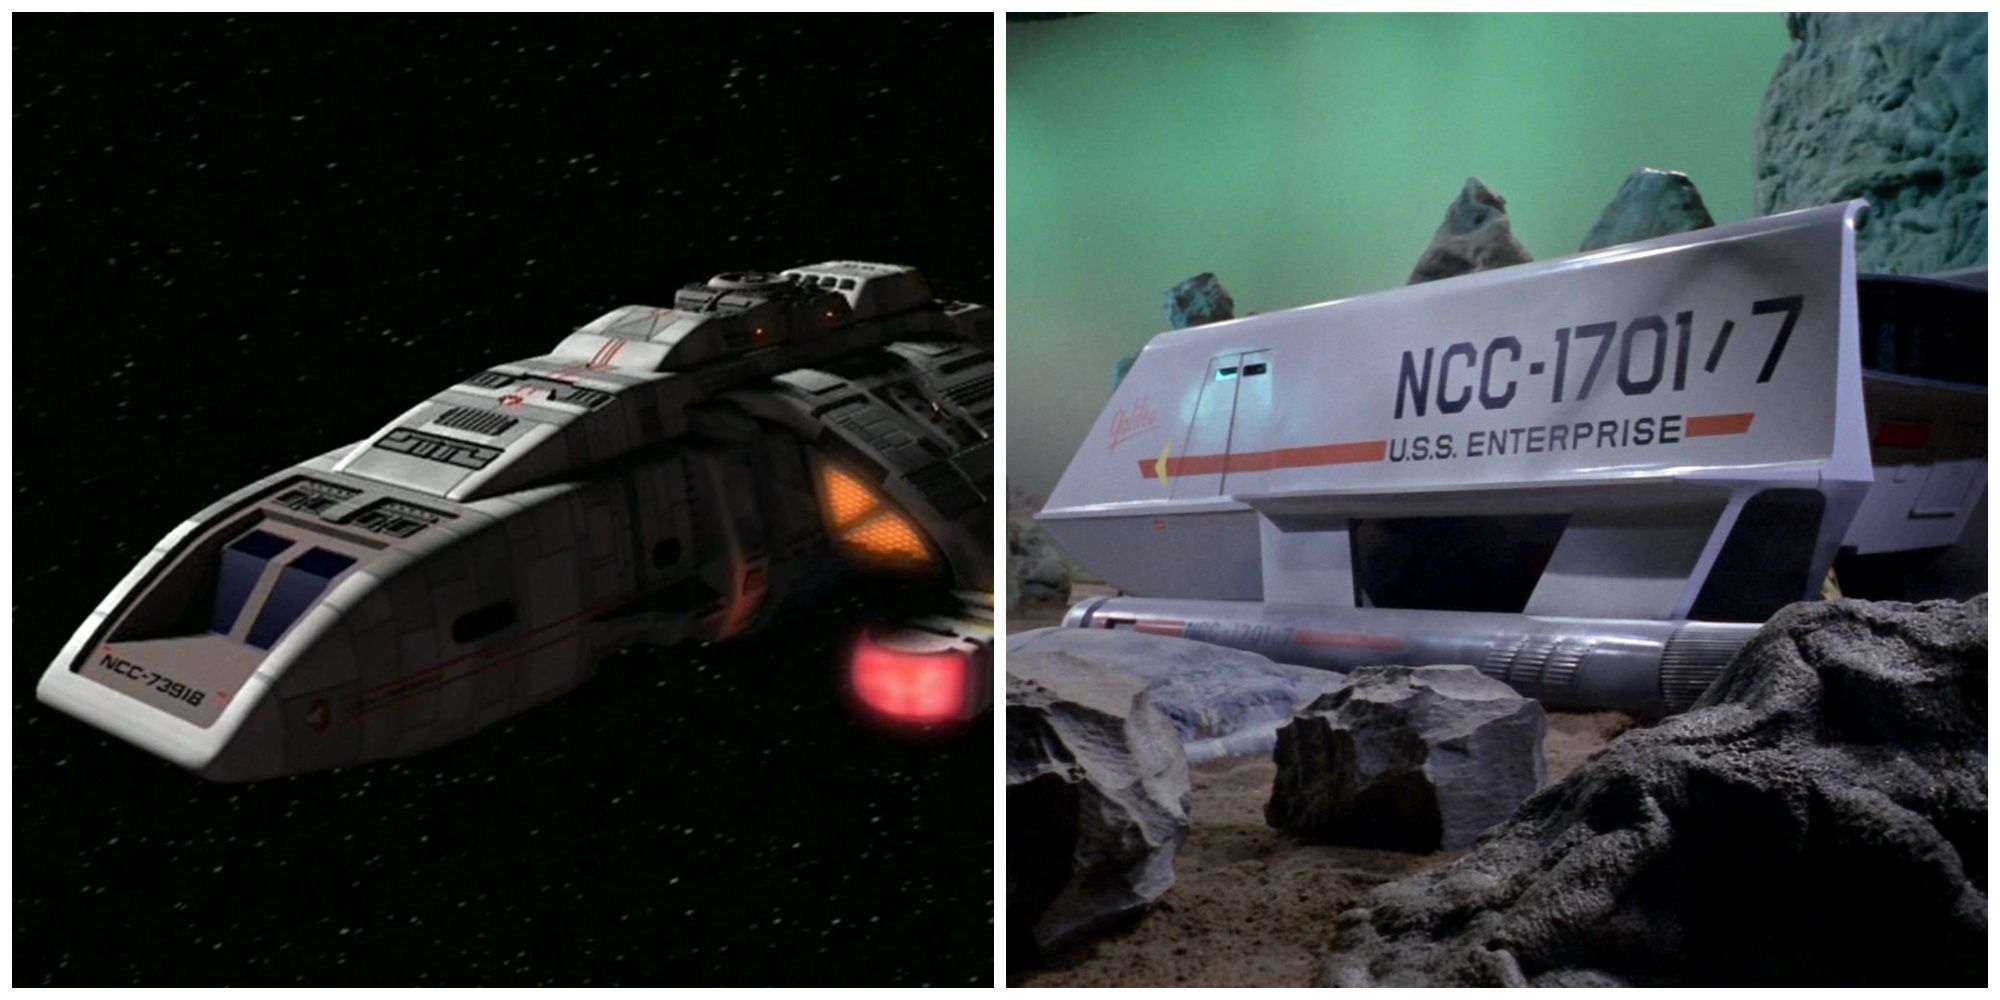 Split image showing a runabout and shuttle in Star Trek: Deep Space Nine and The Original Series, respectively.